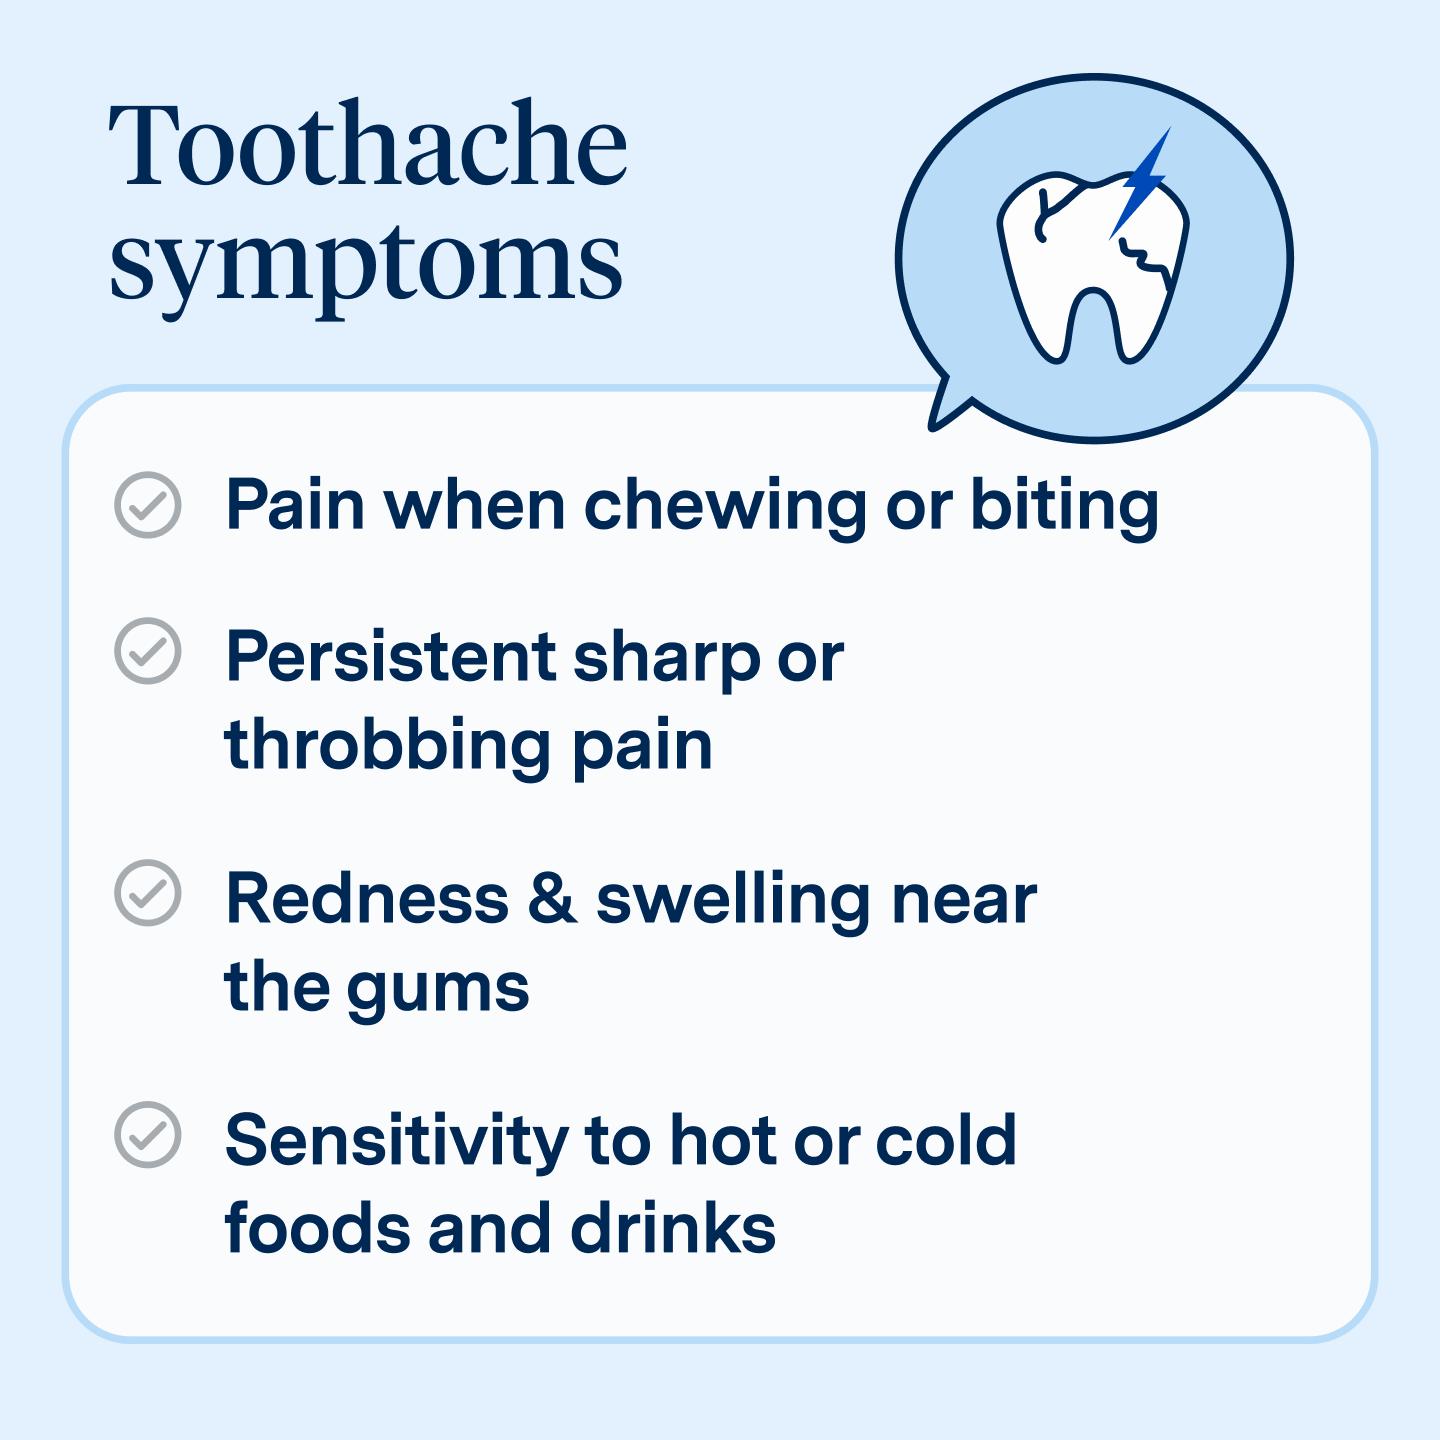 Toothache symptoms include pain when chewing or biting, persistent sharp or throbbing pain, redness and swelling near the gums, and sensitivity to hot or cold foods and drinks.